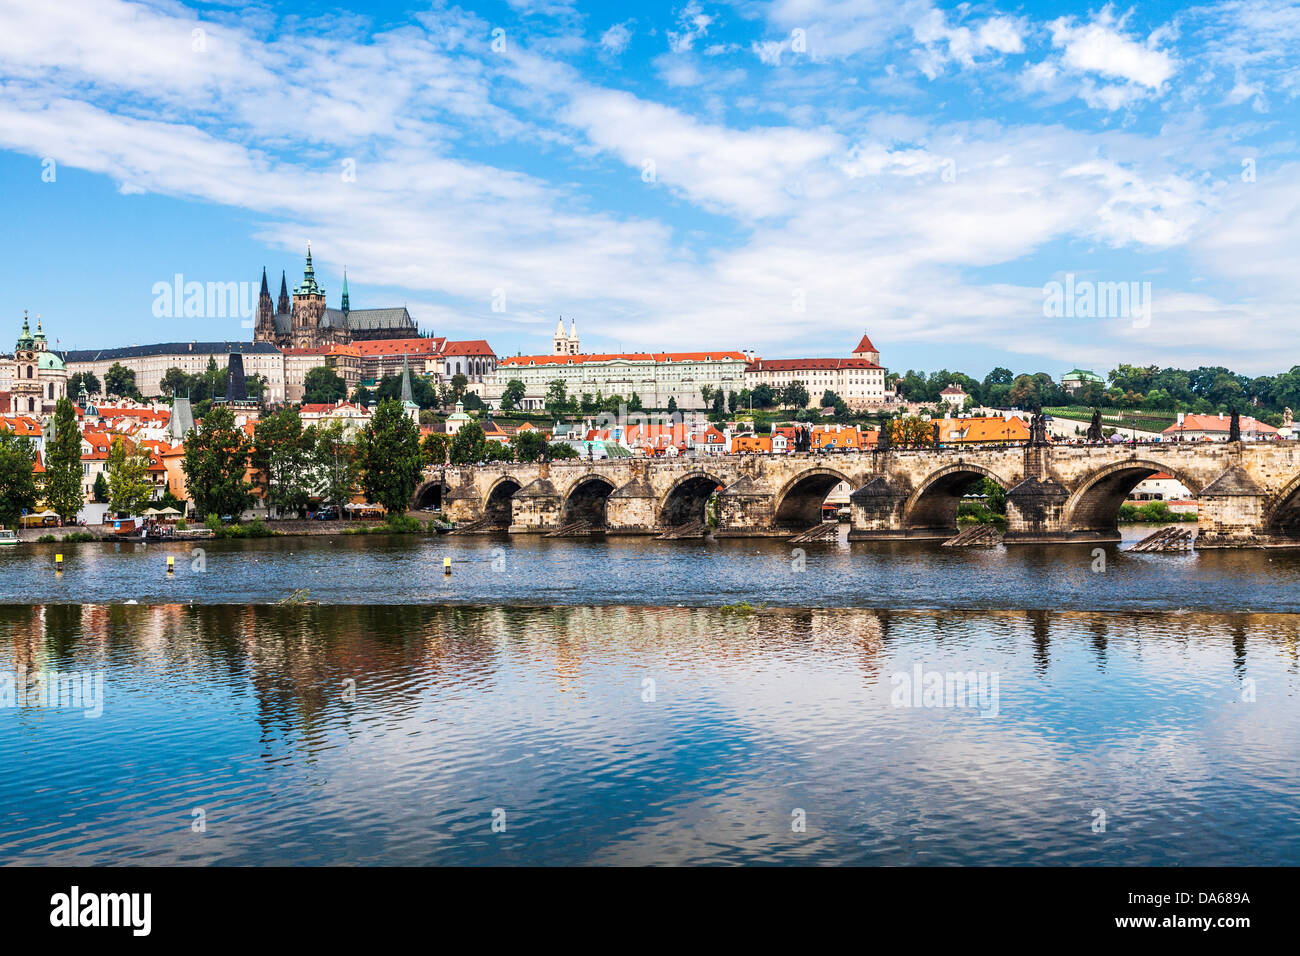 View over the River Vltava towards the Castle, St Vitus Cathedral and Charles Bridge, Czech Republic. Stock Photo